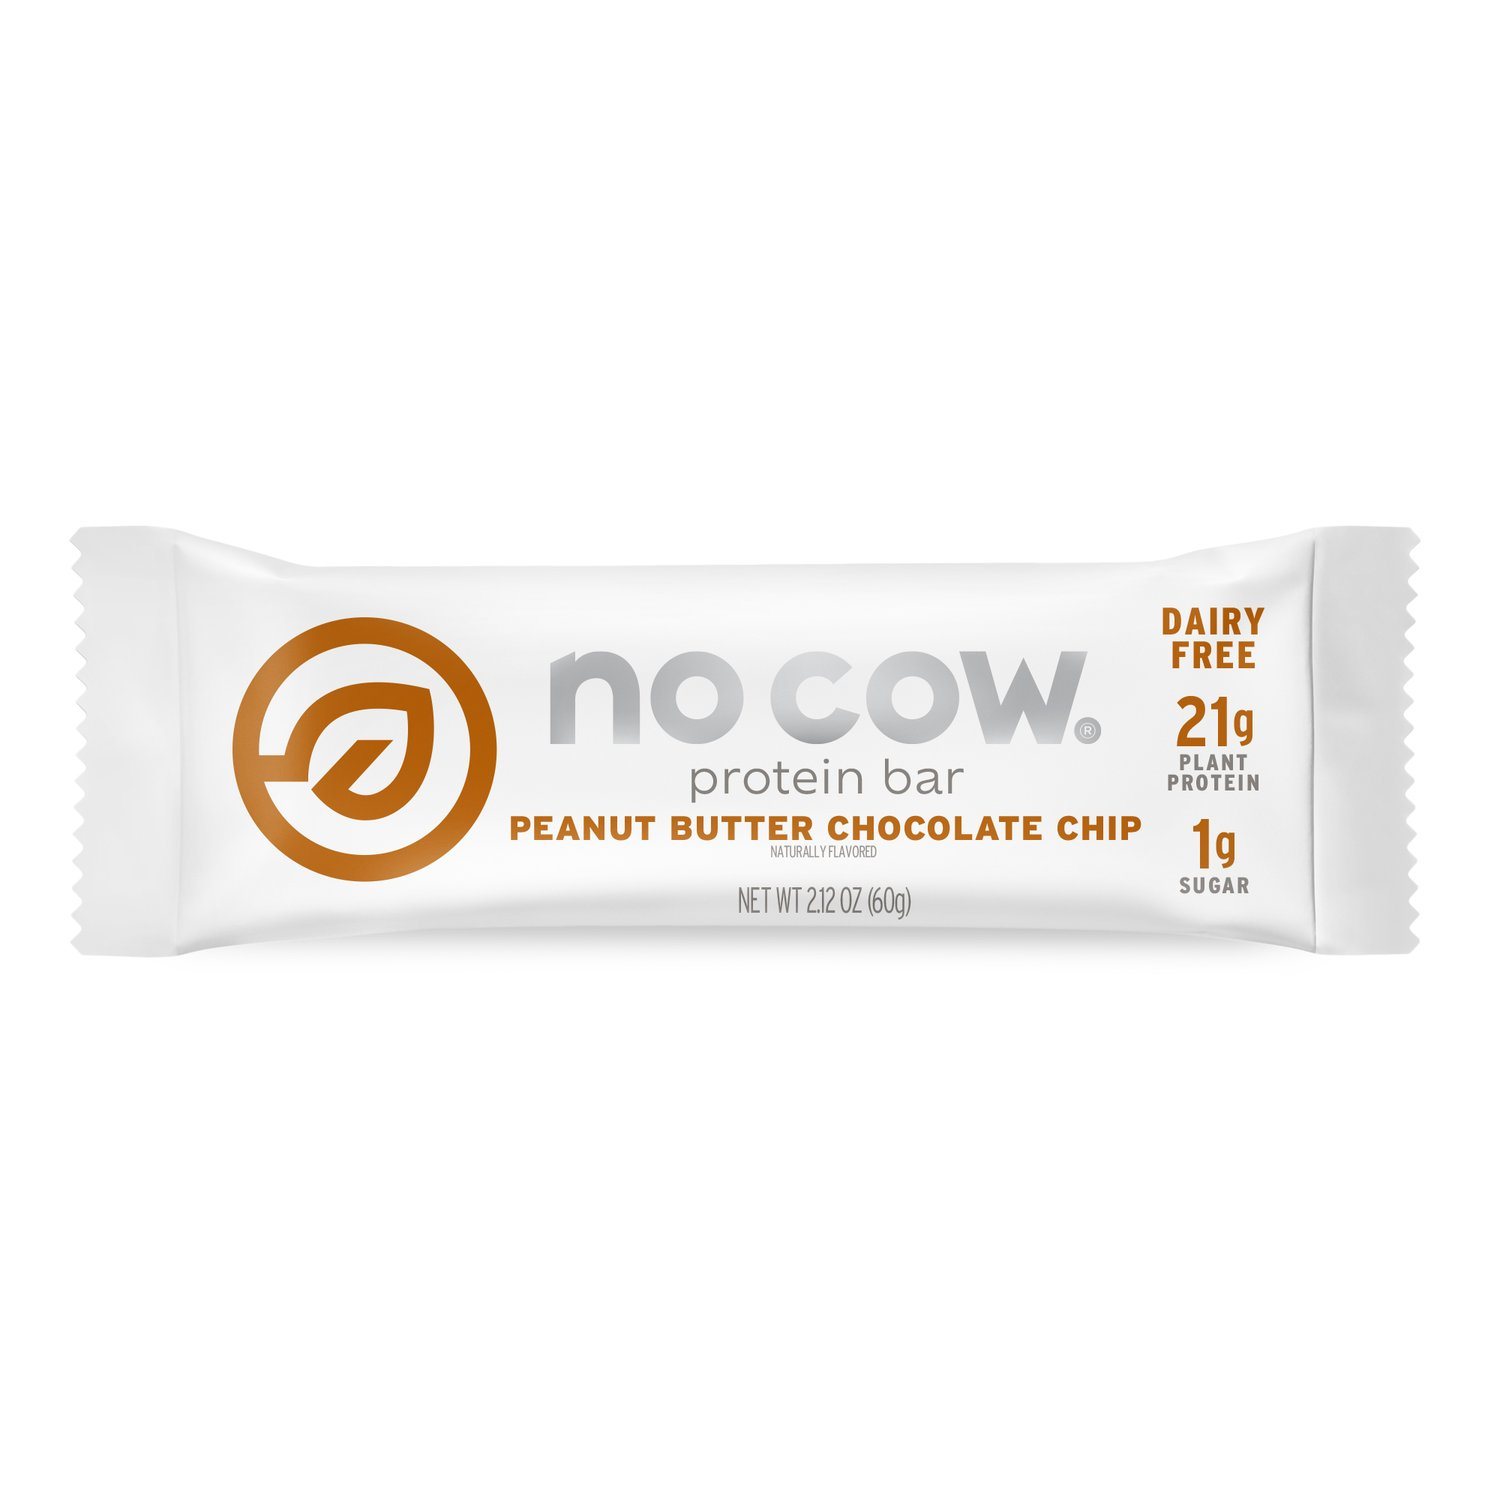 No Cow Plant Based Protein Bars No Cow Peanut Butter Chocolate Chip 2.12 Ounce 